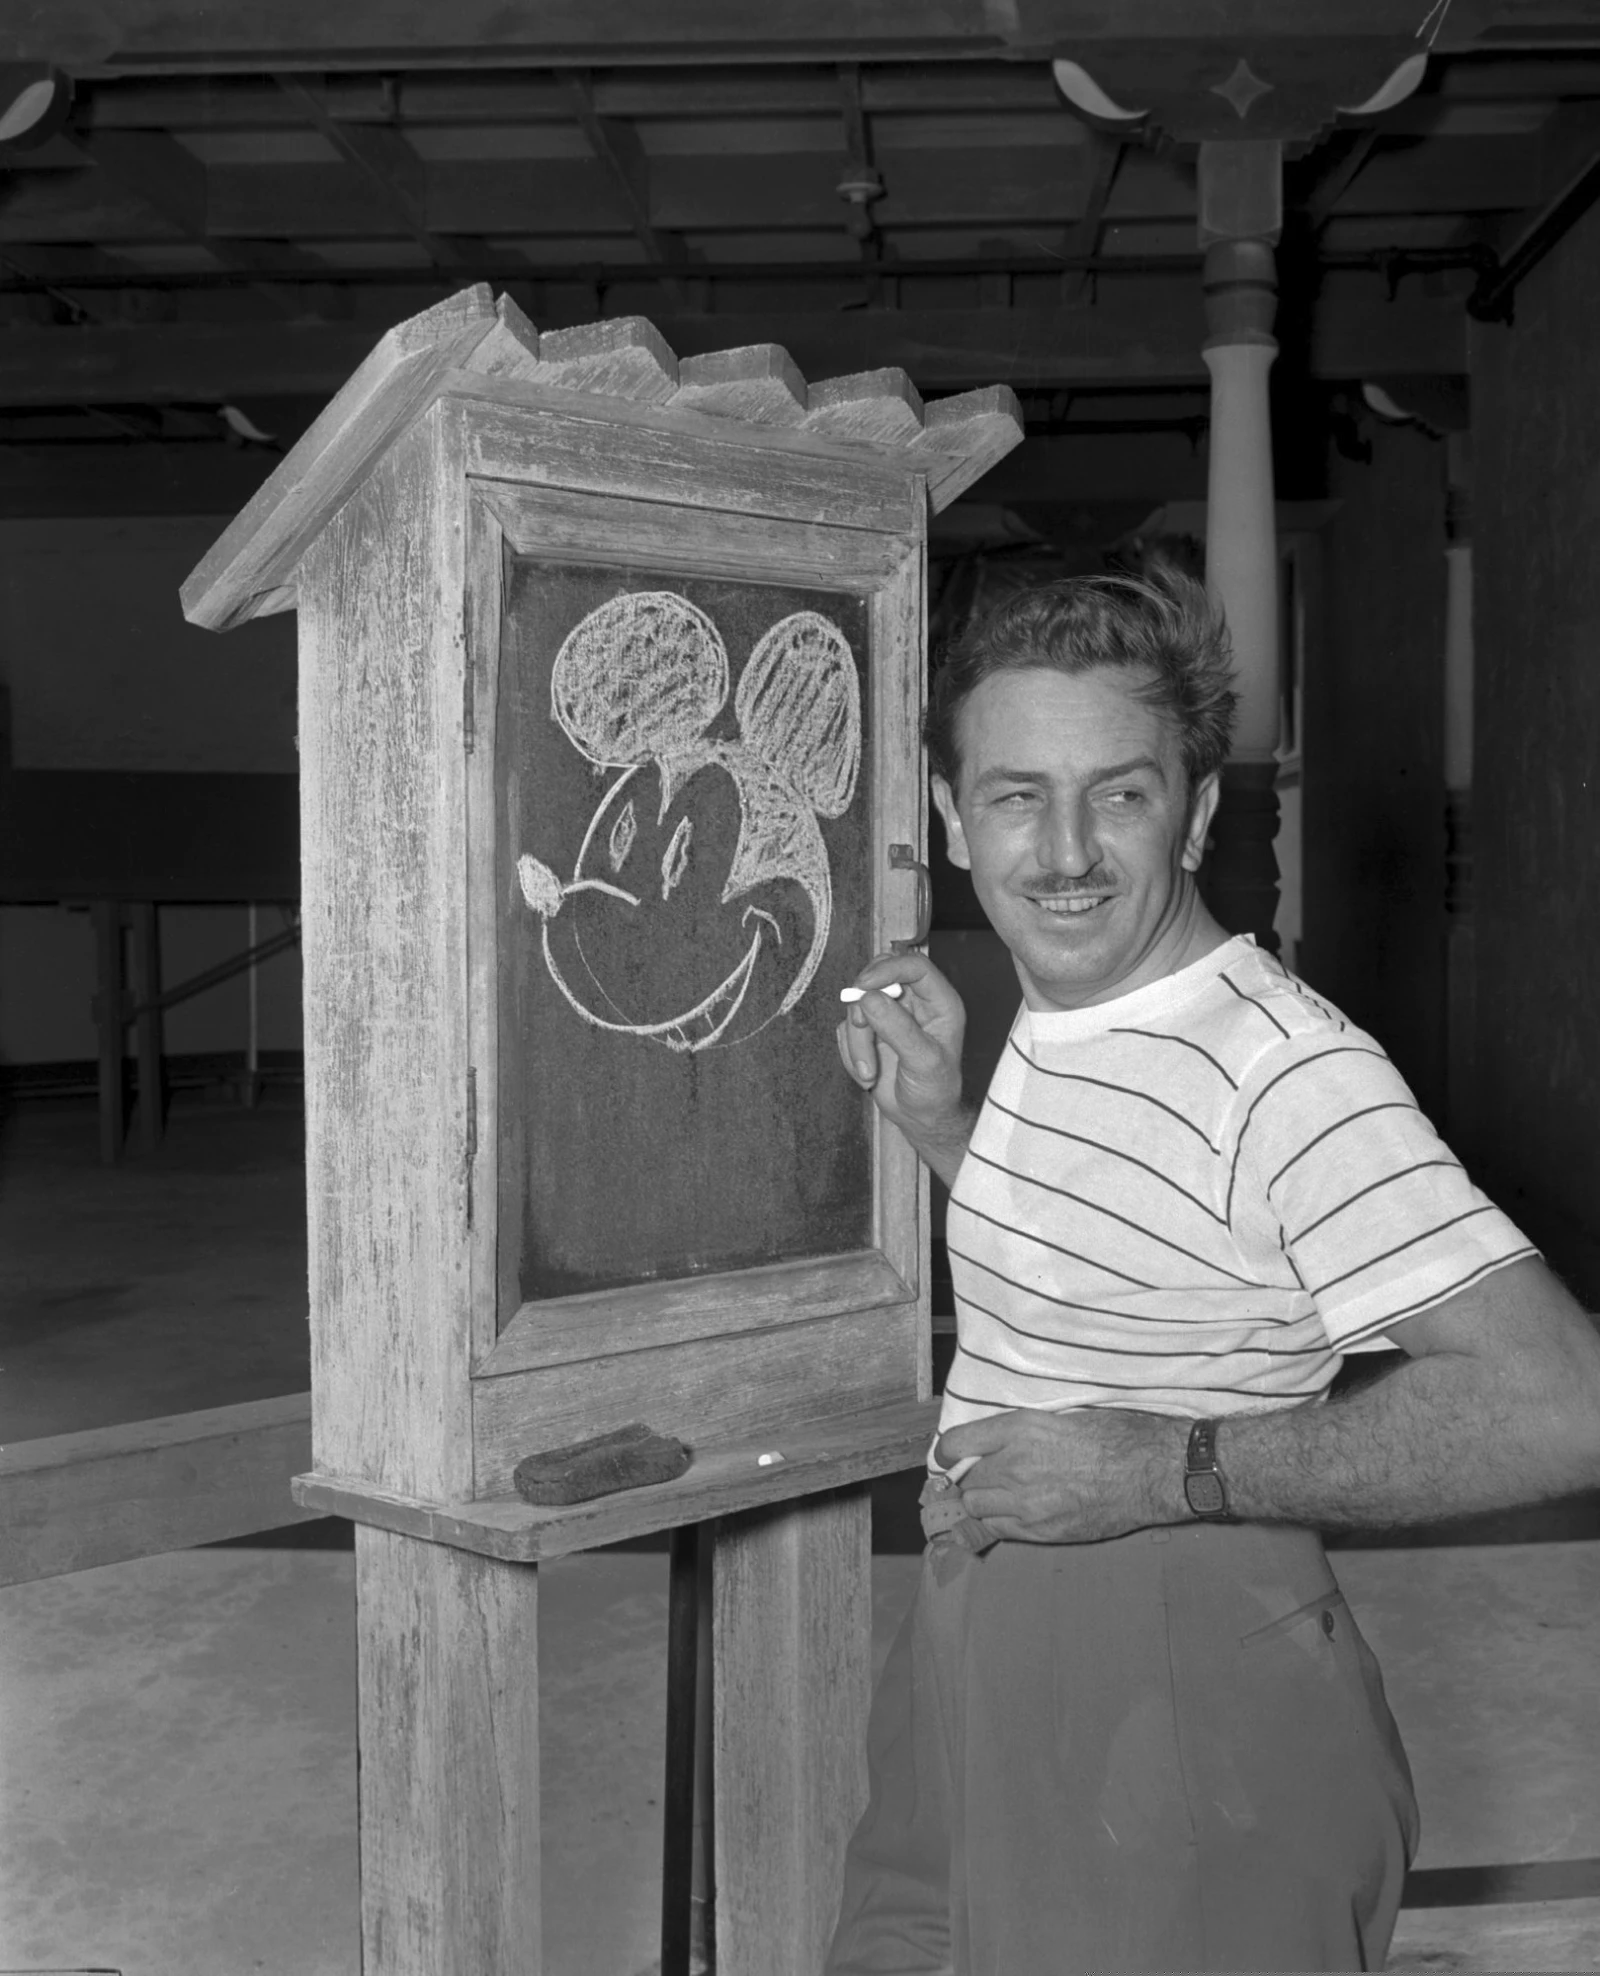 The earliest version of Mickey Mouse is set to become public domain in 2024 - What does that mean?